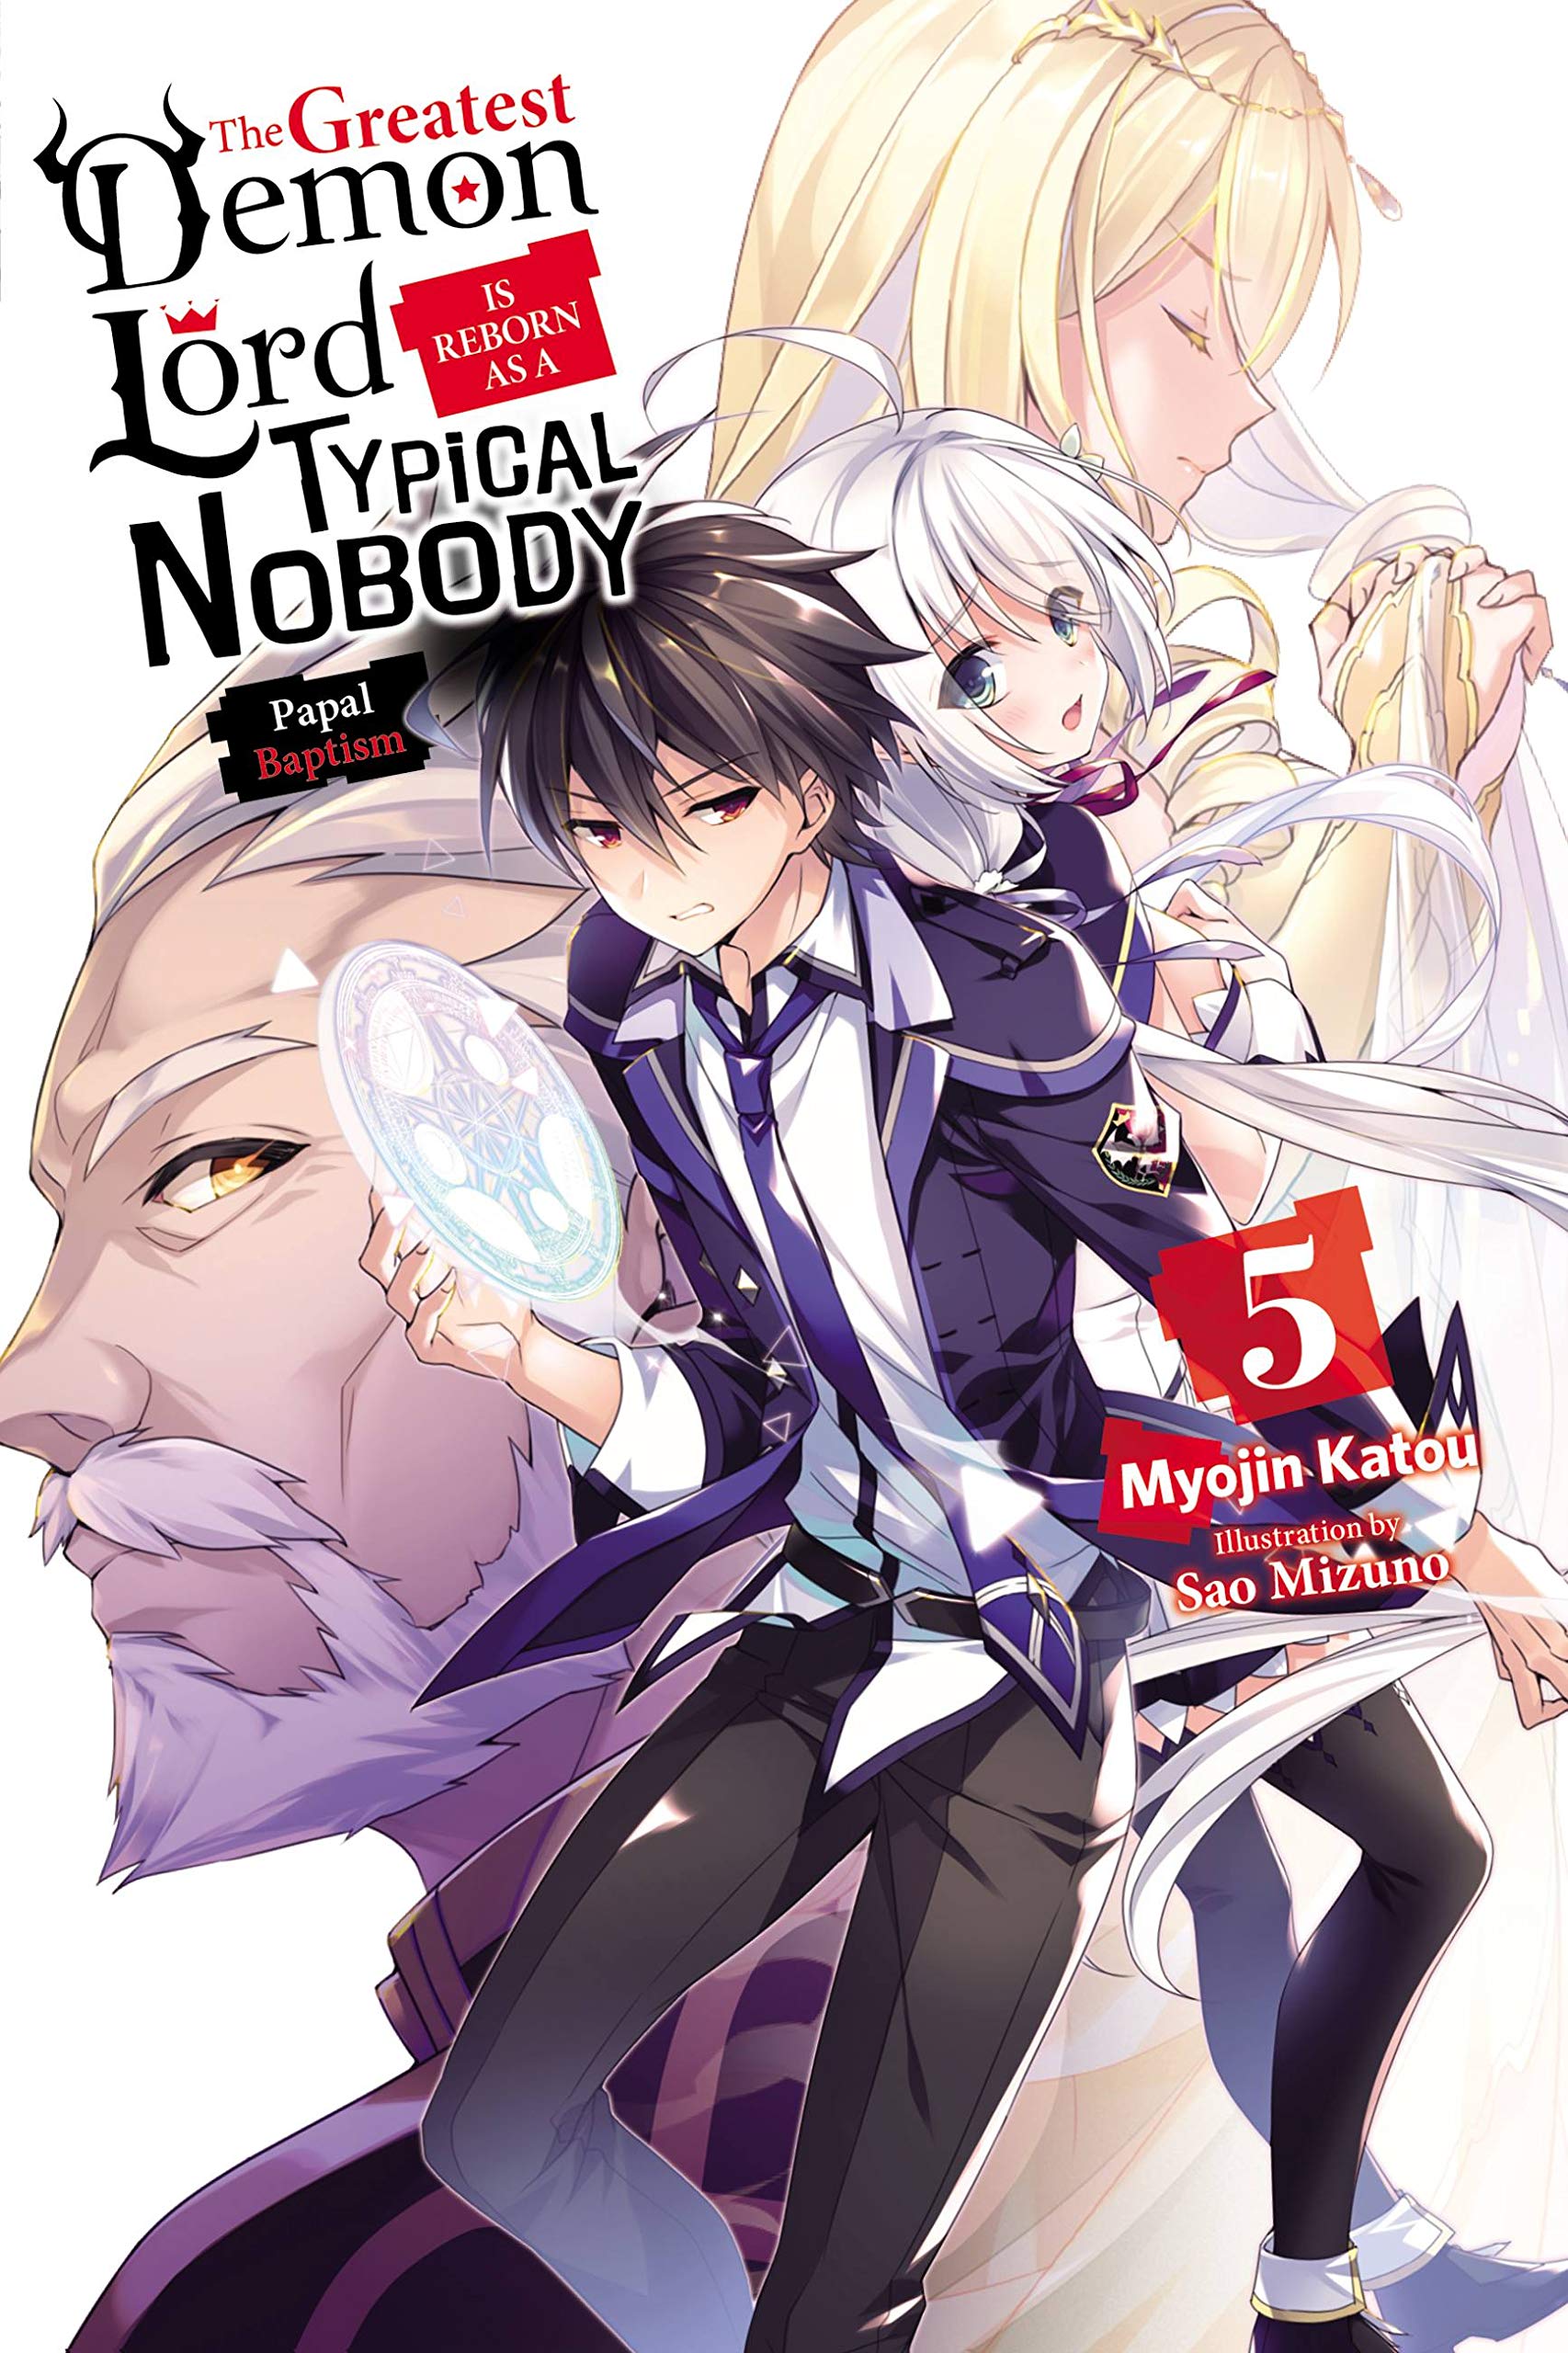 The Greatest Demon Lord Is Reborn as a Typical Nobody - Volume 5 | Myojin Katou